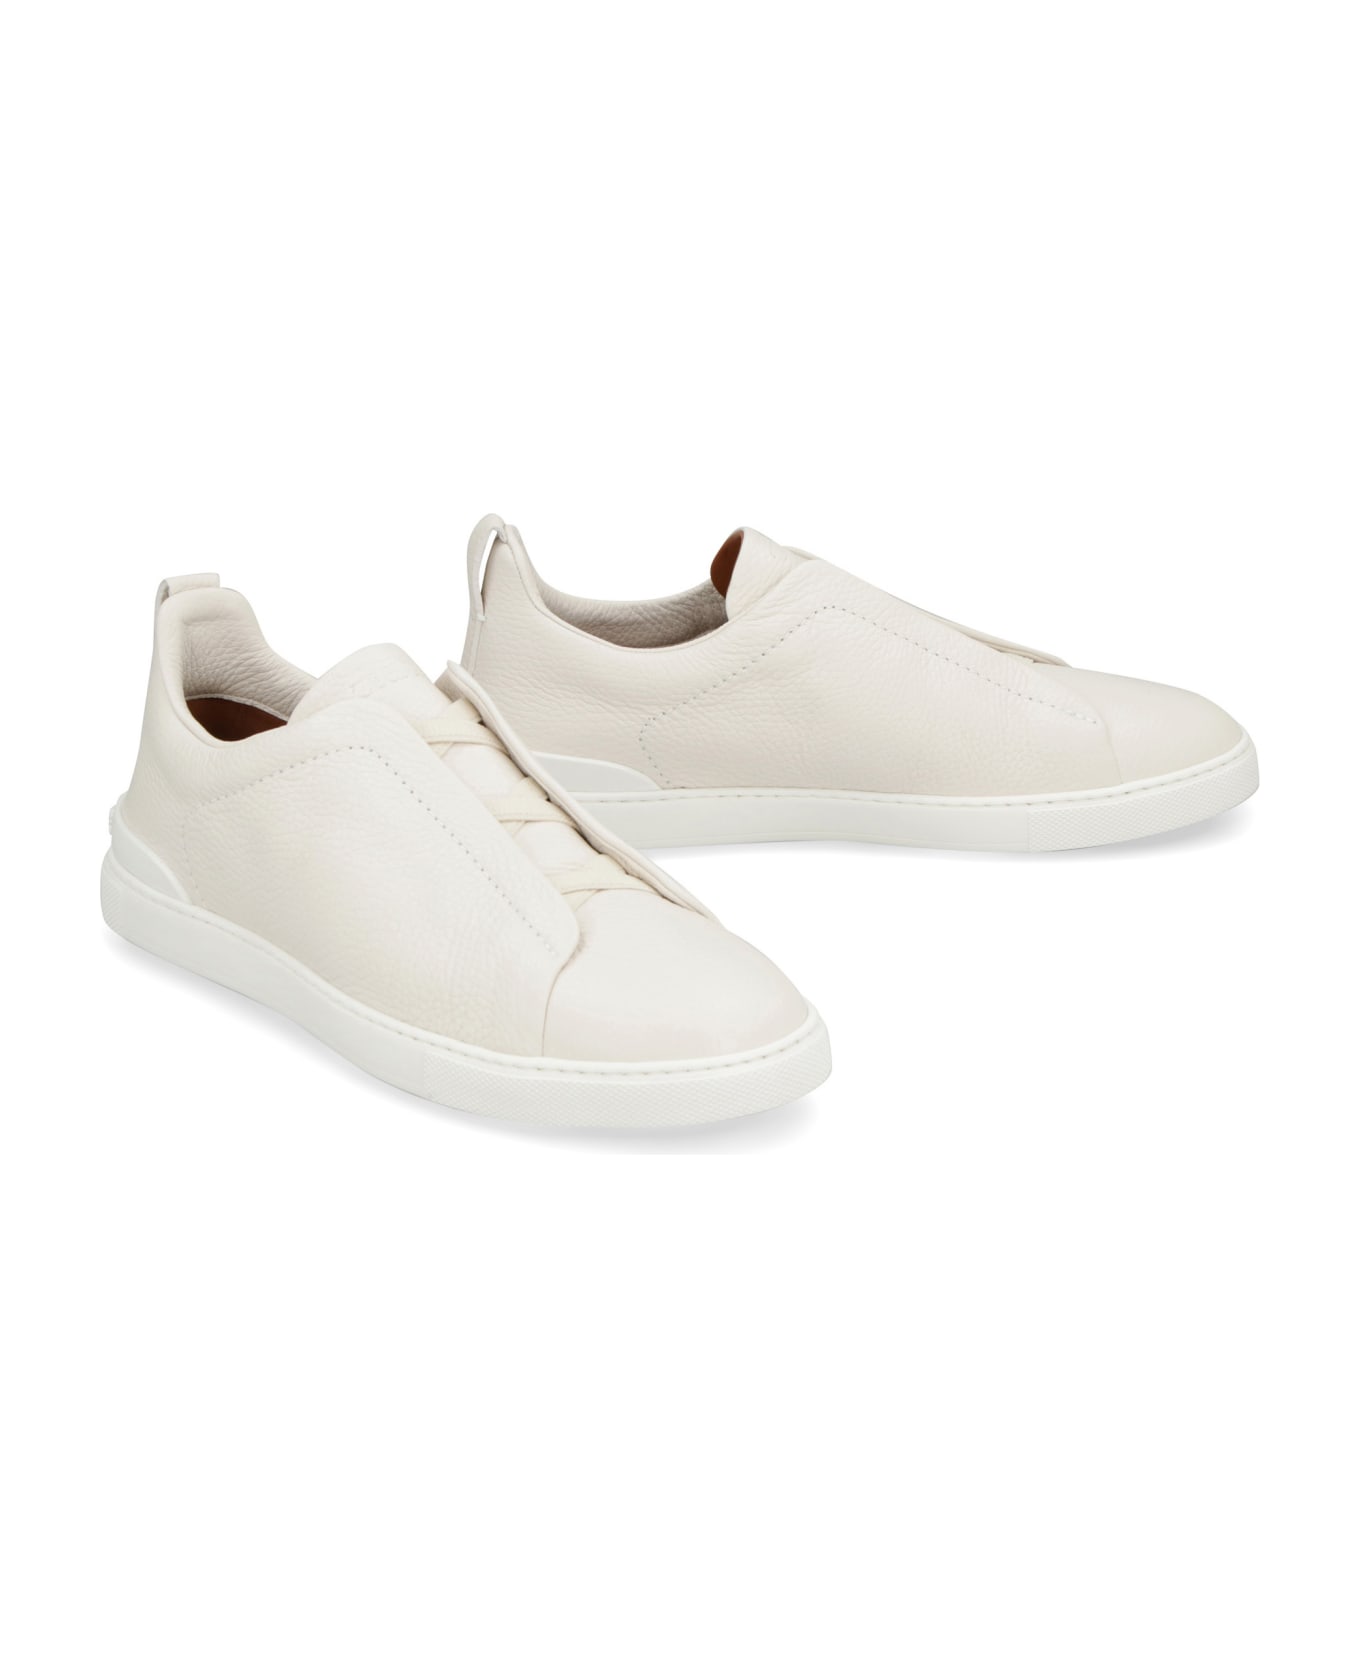 Zegna Triple Stitch Leather Sneakers - Ivory